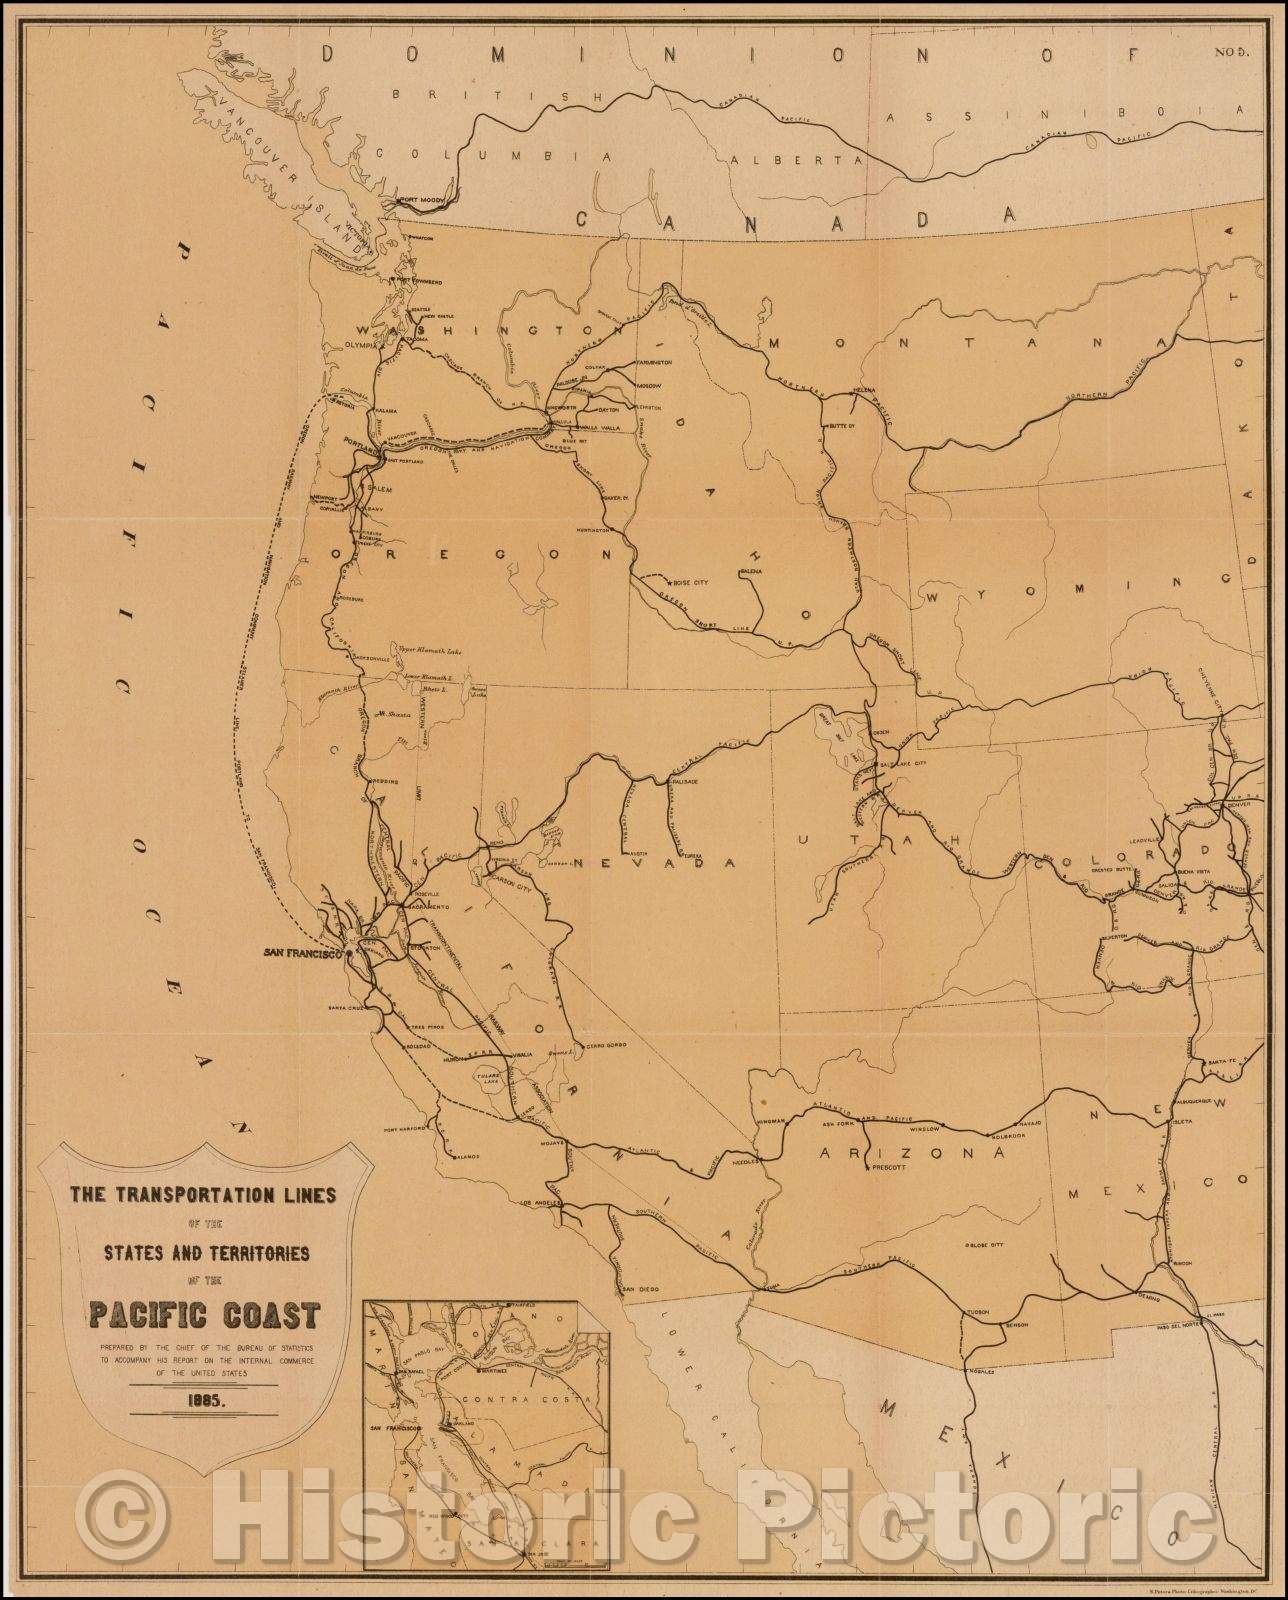 Historic Map - Transmississippi West The Transportation Lines of the States and Territories of the Pacific Coast, 1885, United States Treasury Department - Vintage Wall Art